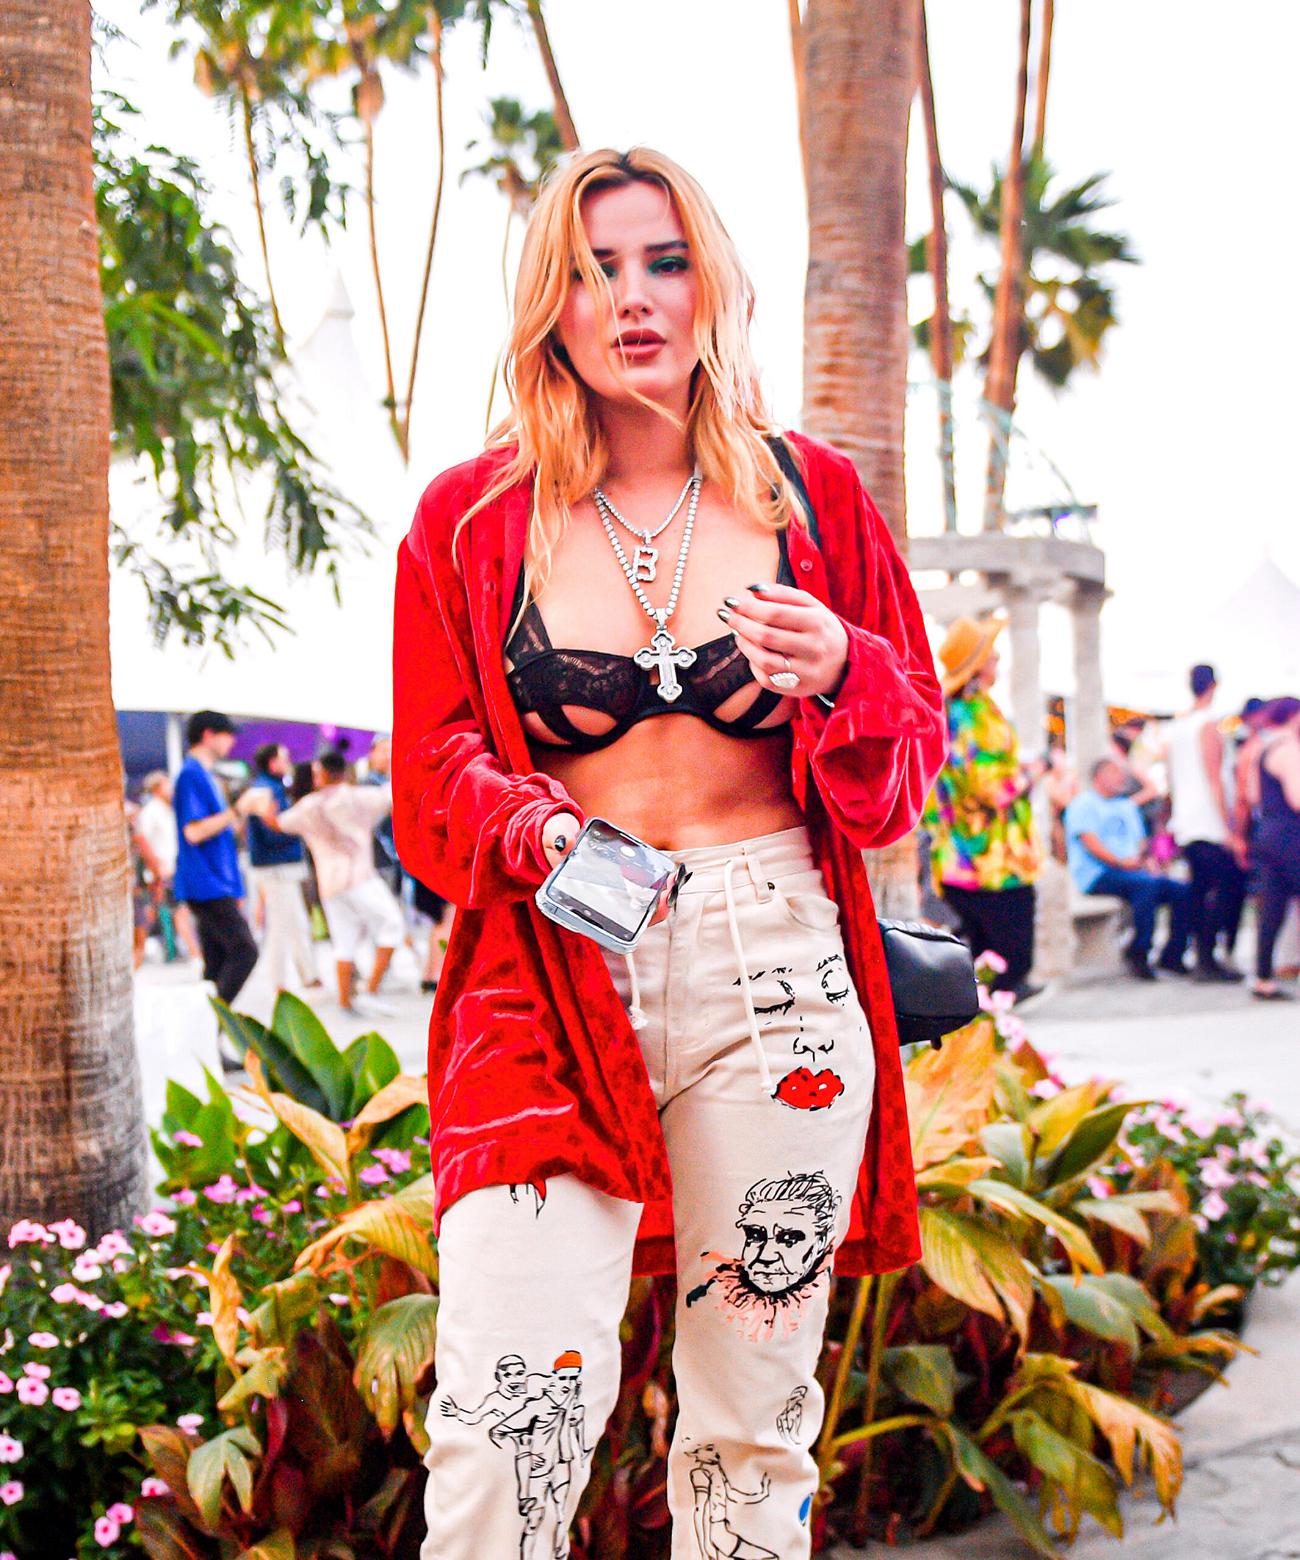 Bella Thorne Shares Sexy Outfits To "Stunt On Ex" With